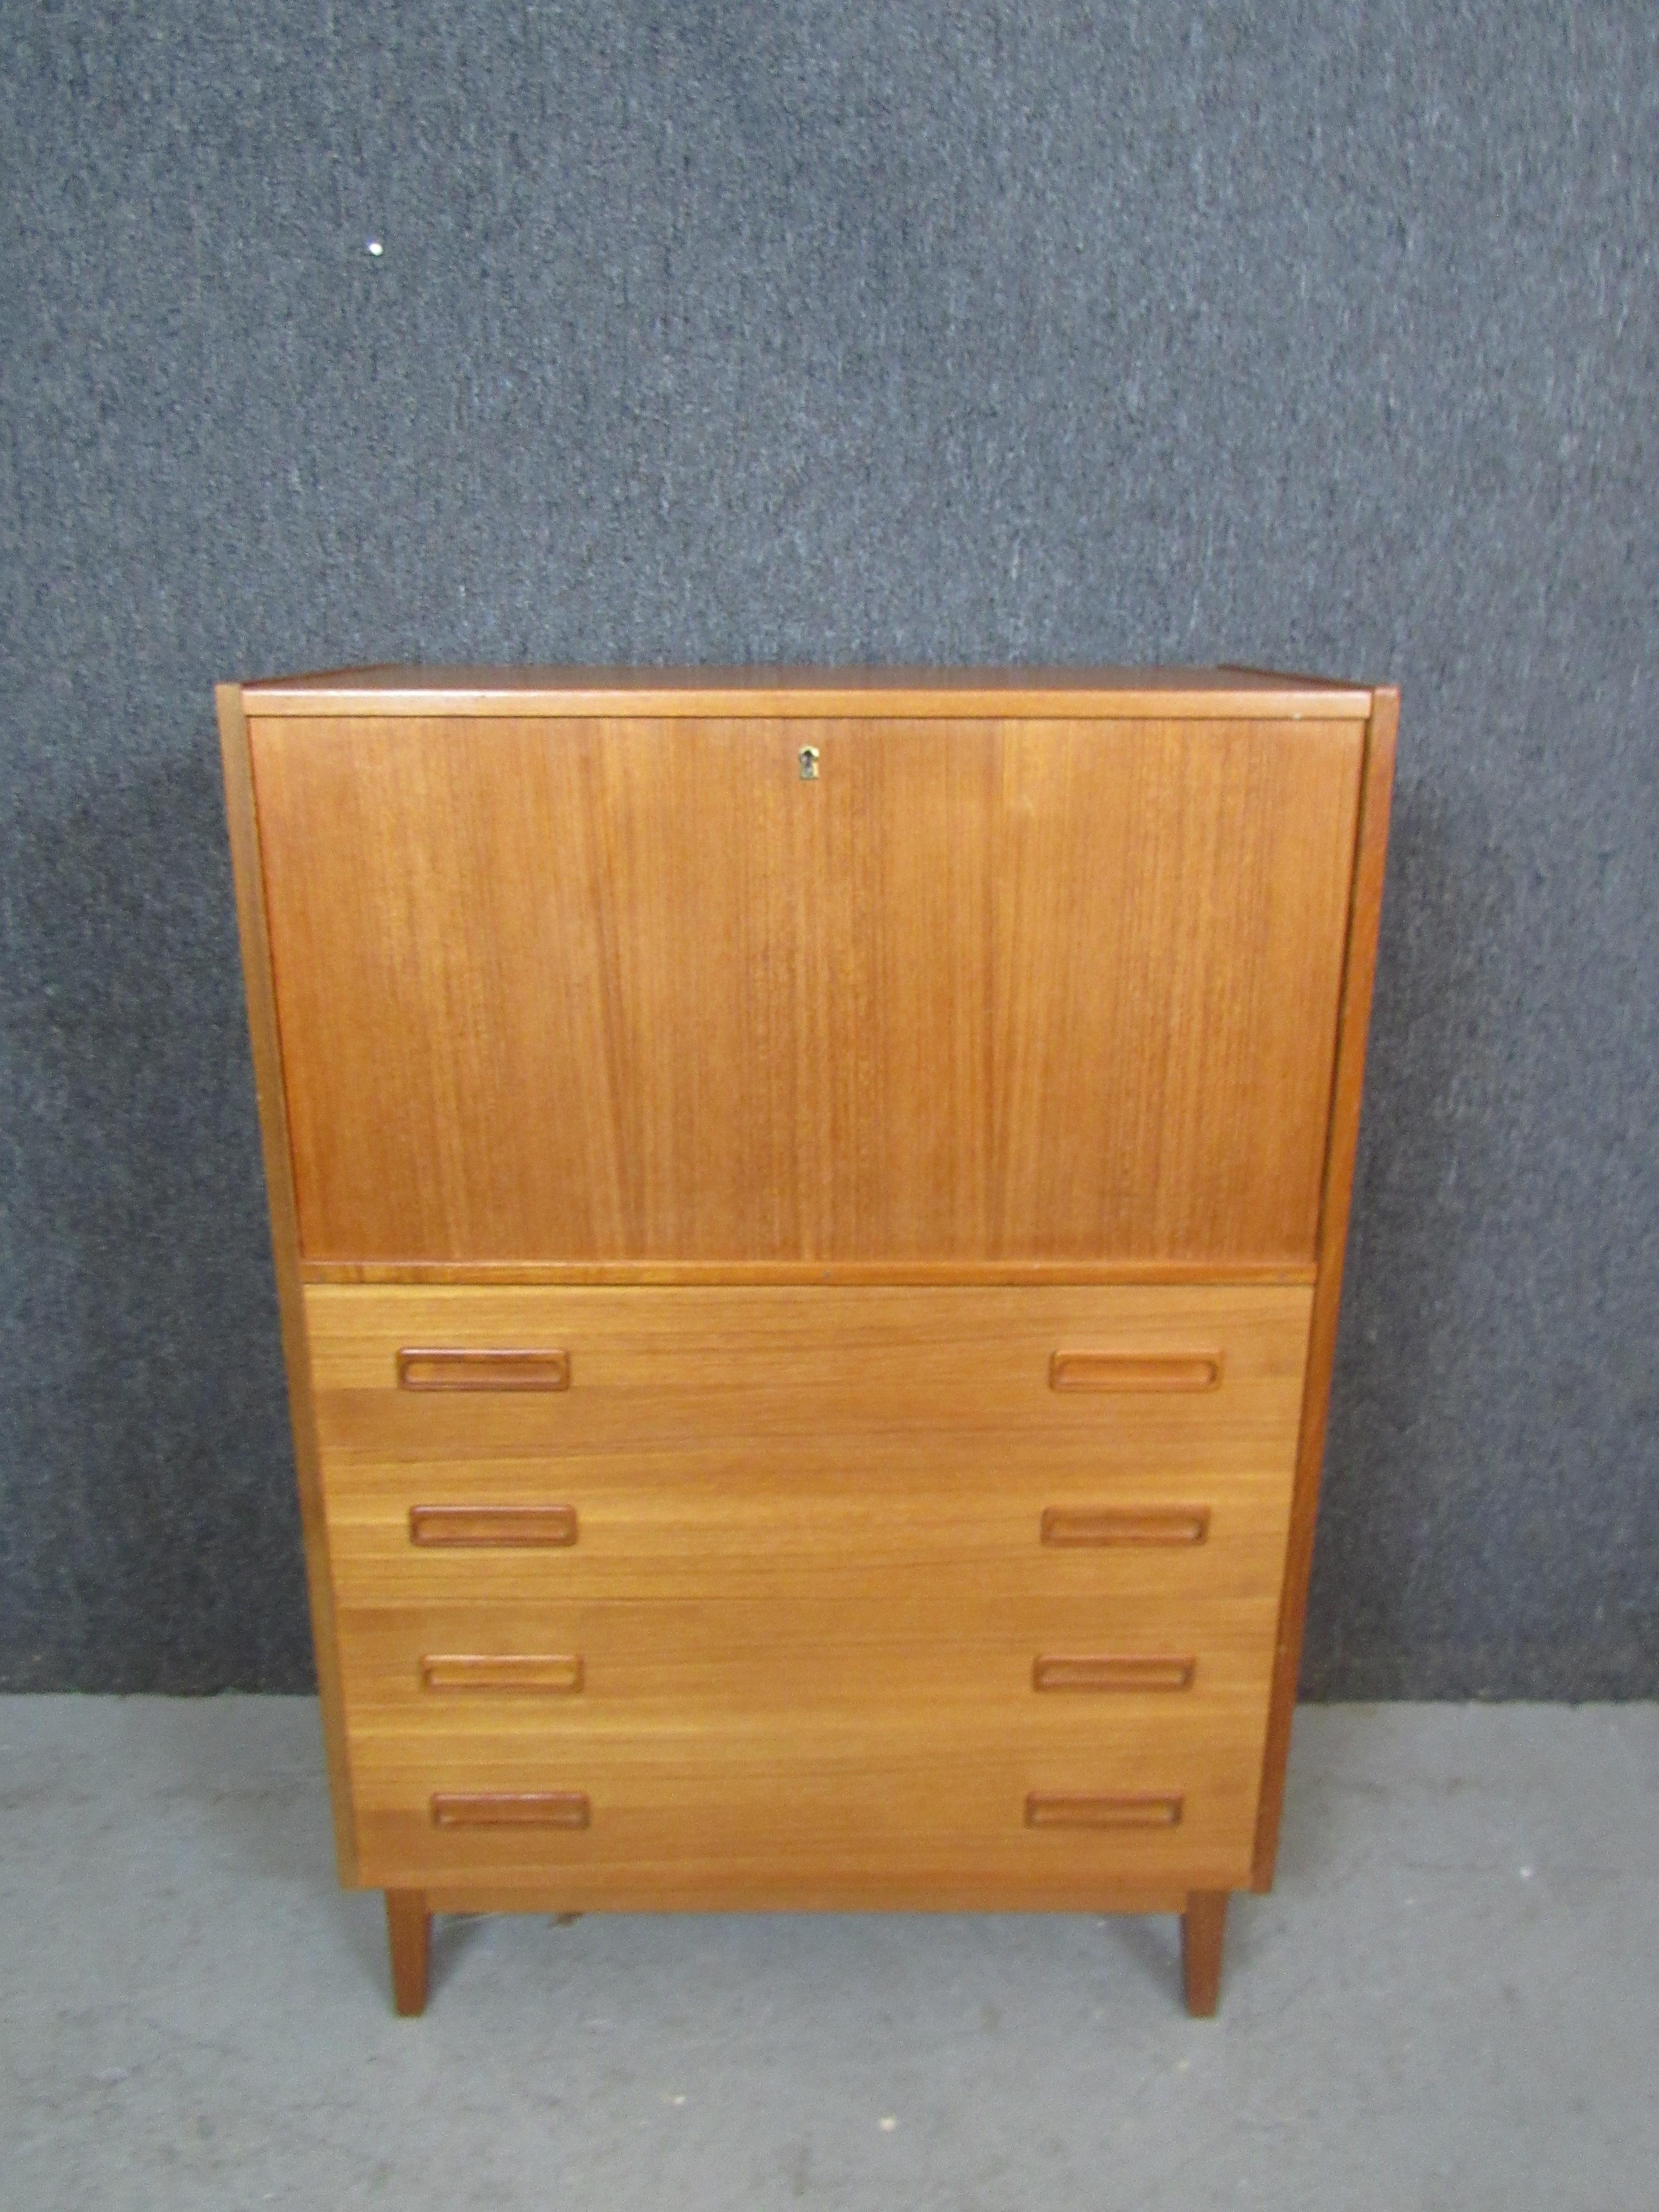 Add functional and stylish storage to your workspace with this fantastic vintage Danish teak wood secretary desk. The drop down door opens up to reveal an ample desktop with built in cubbyholes and drawers to help cut down on clutter. Four